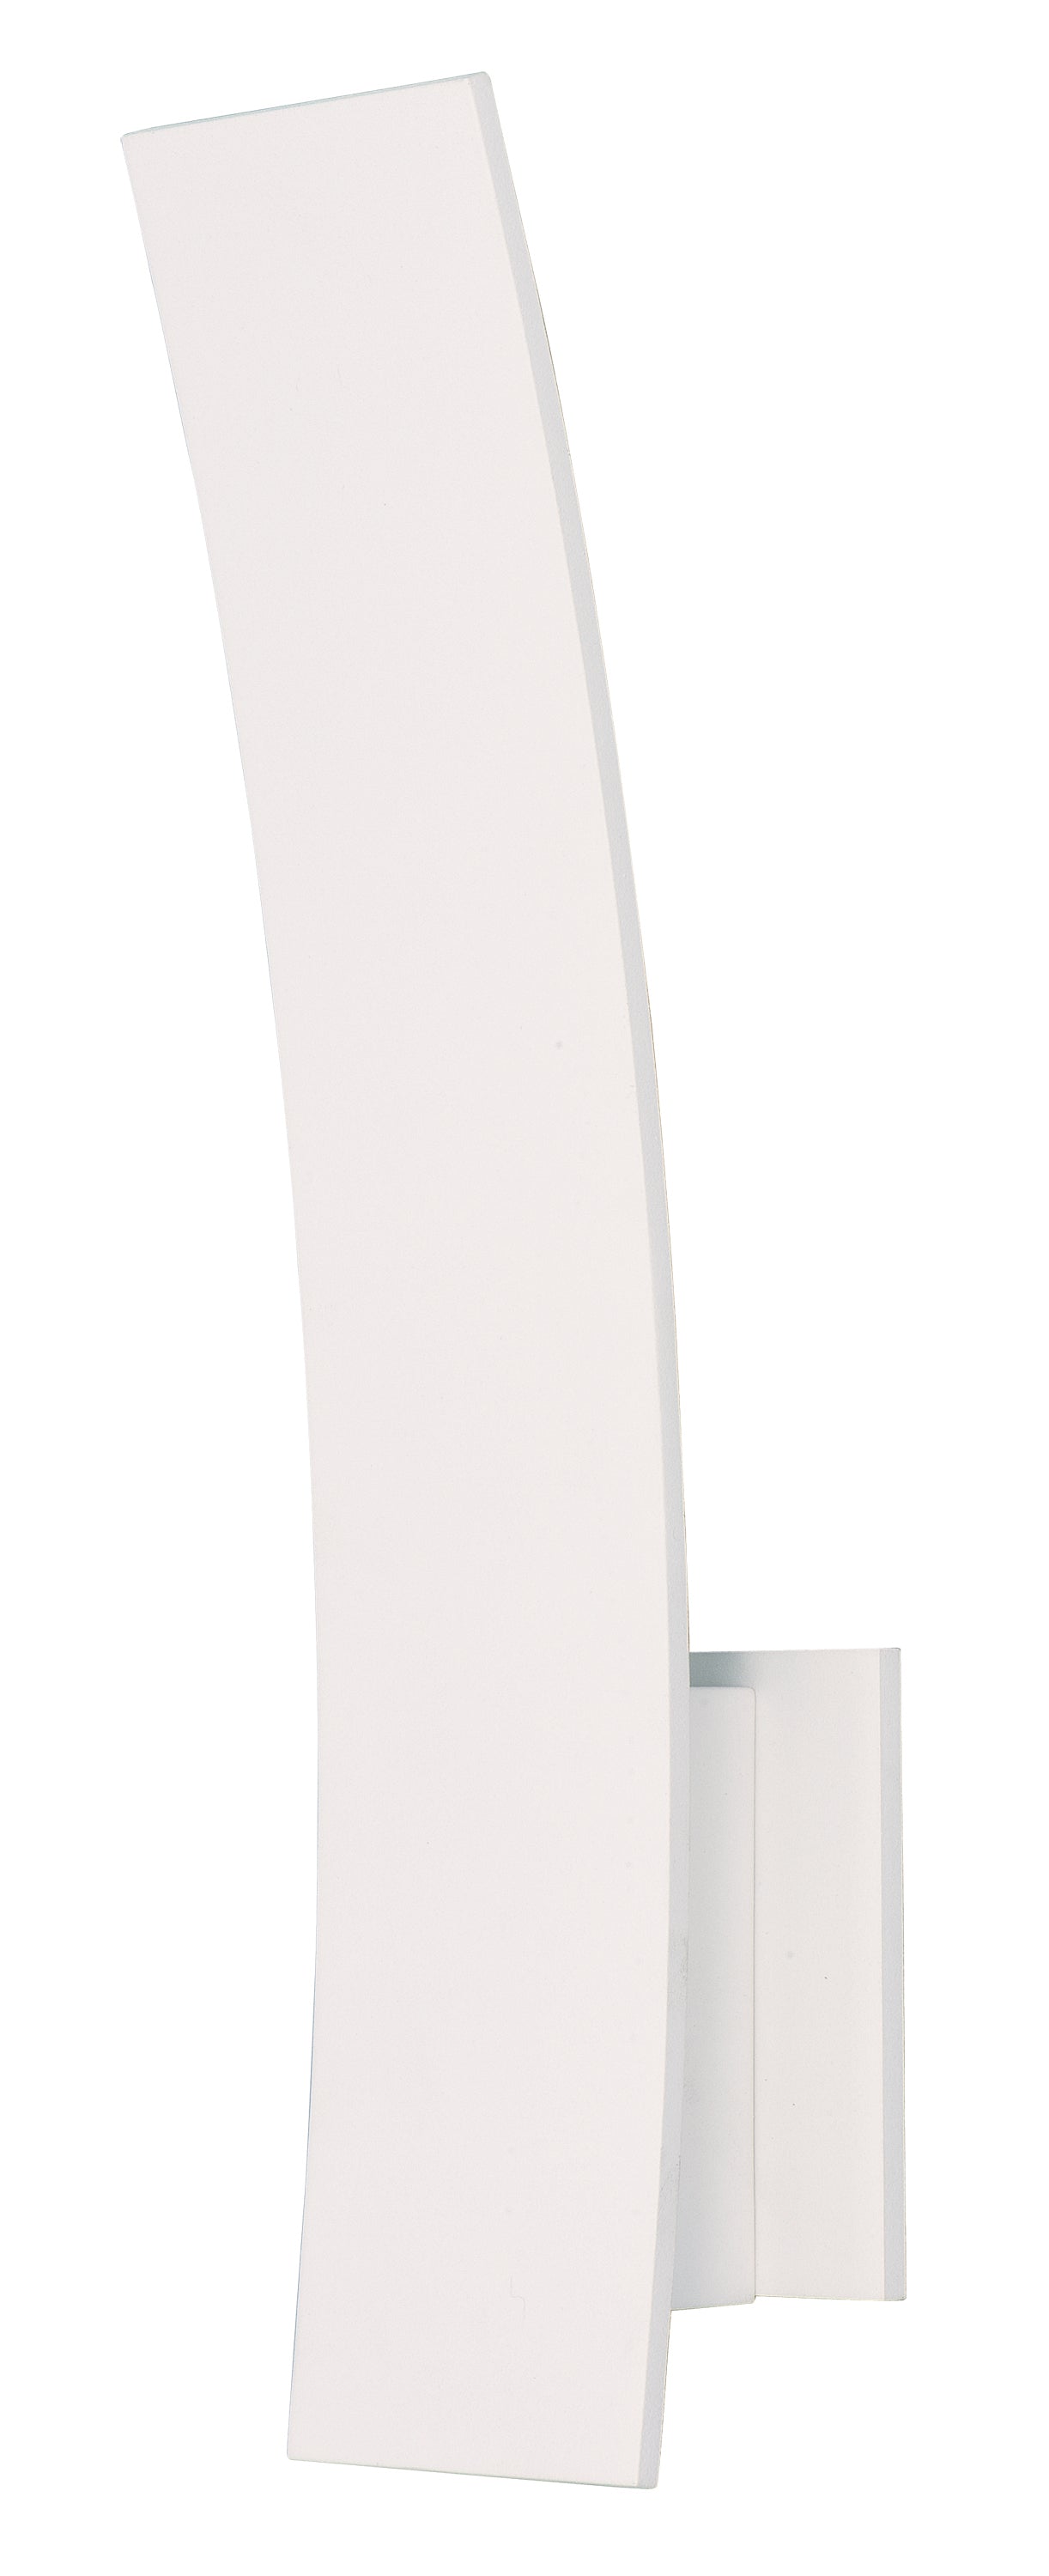 Alumilux Prime-Wall Sconce Wall Light Fixtures ET2 0x4.25x15.75 White 